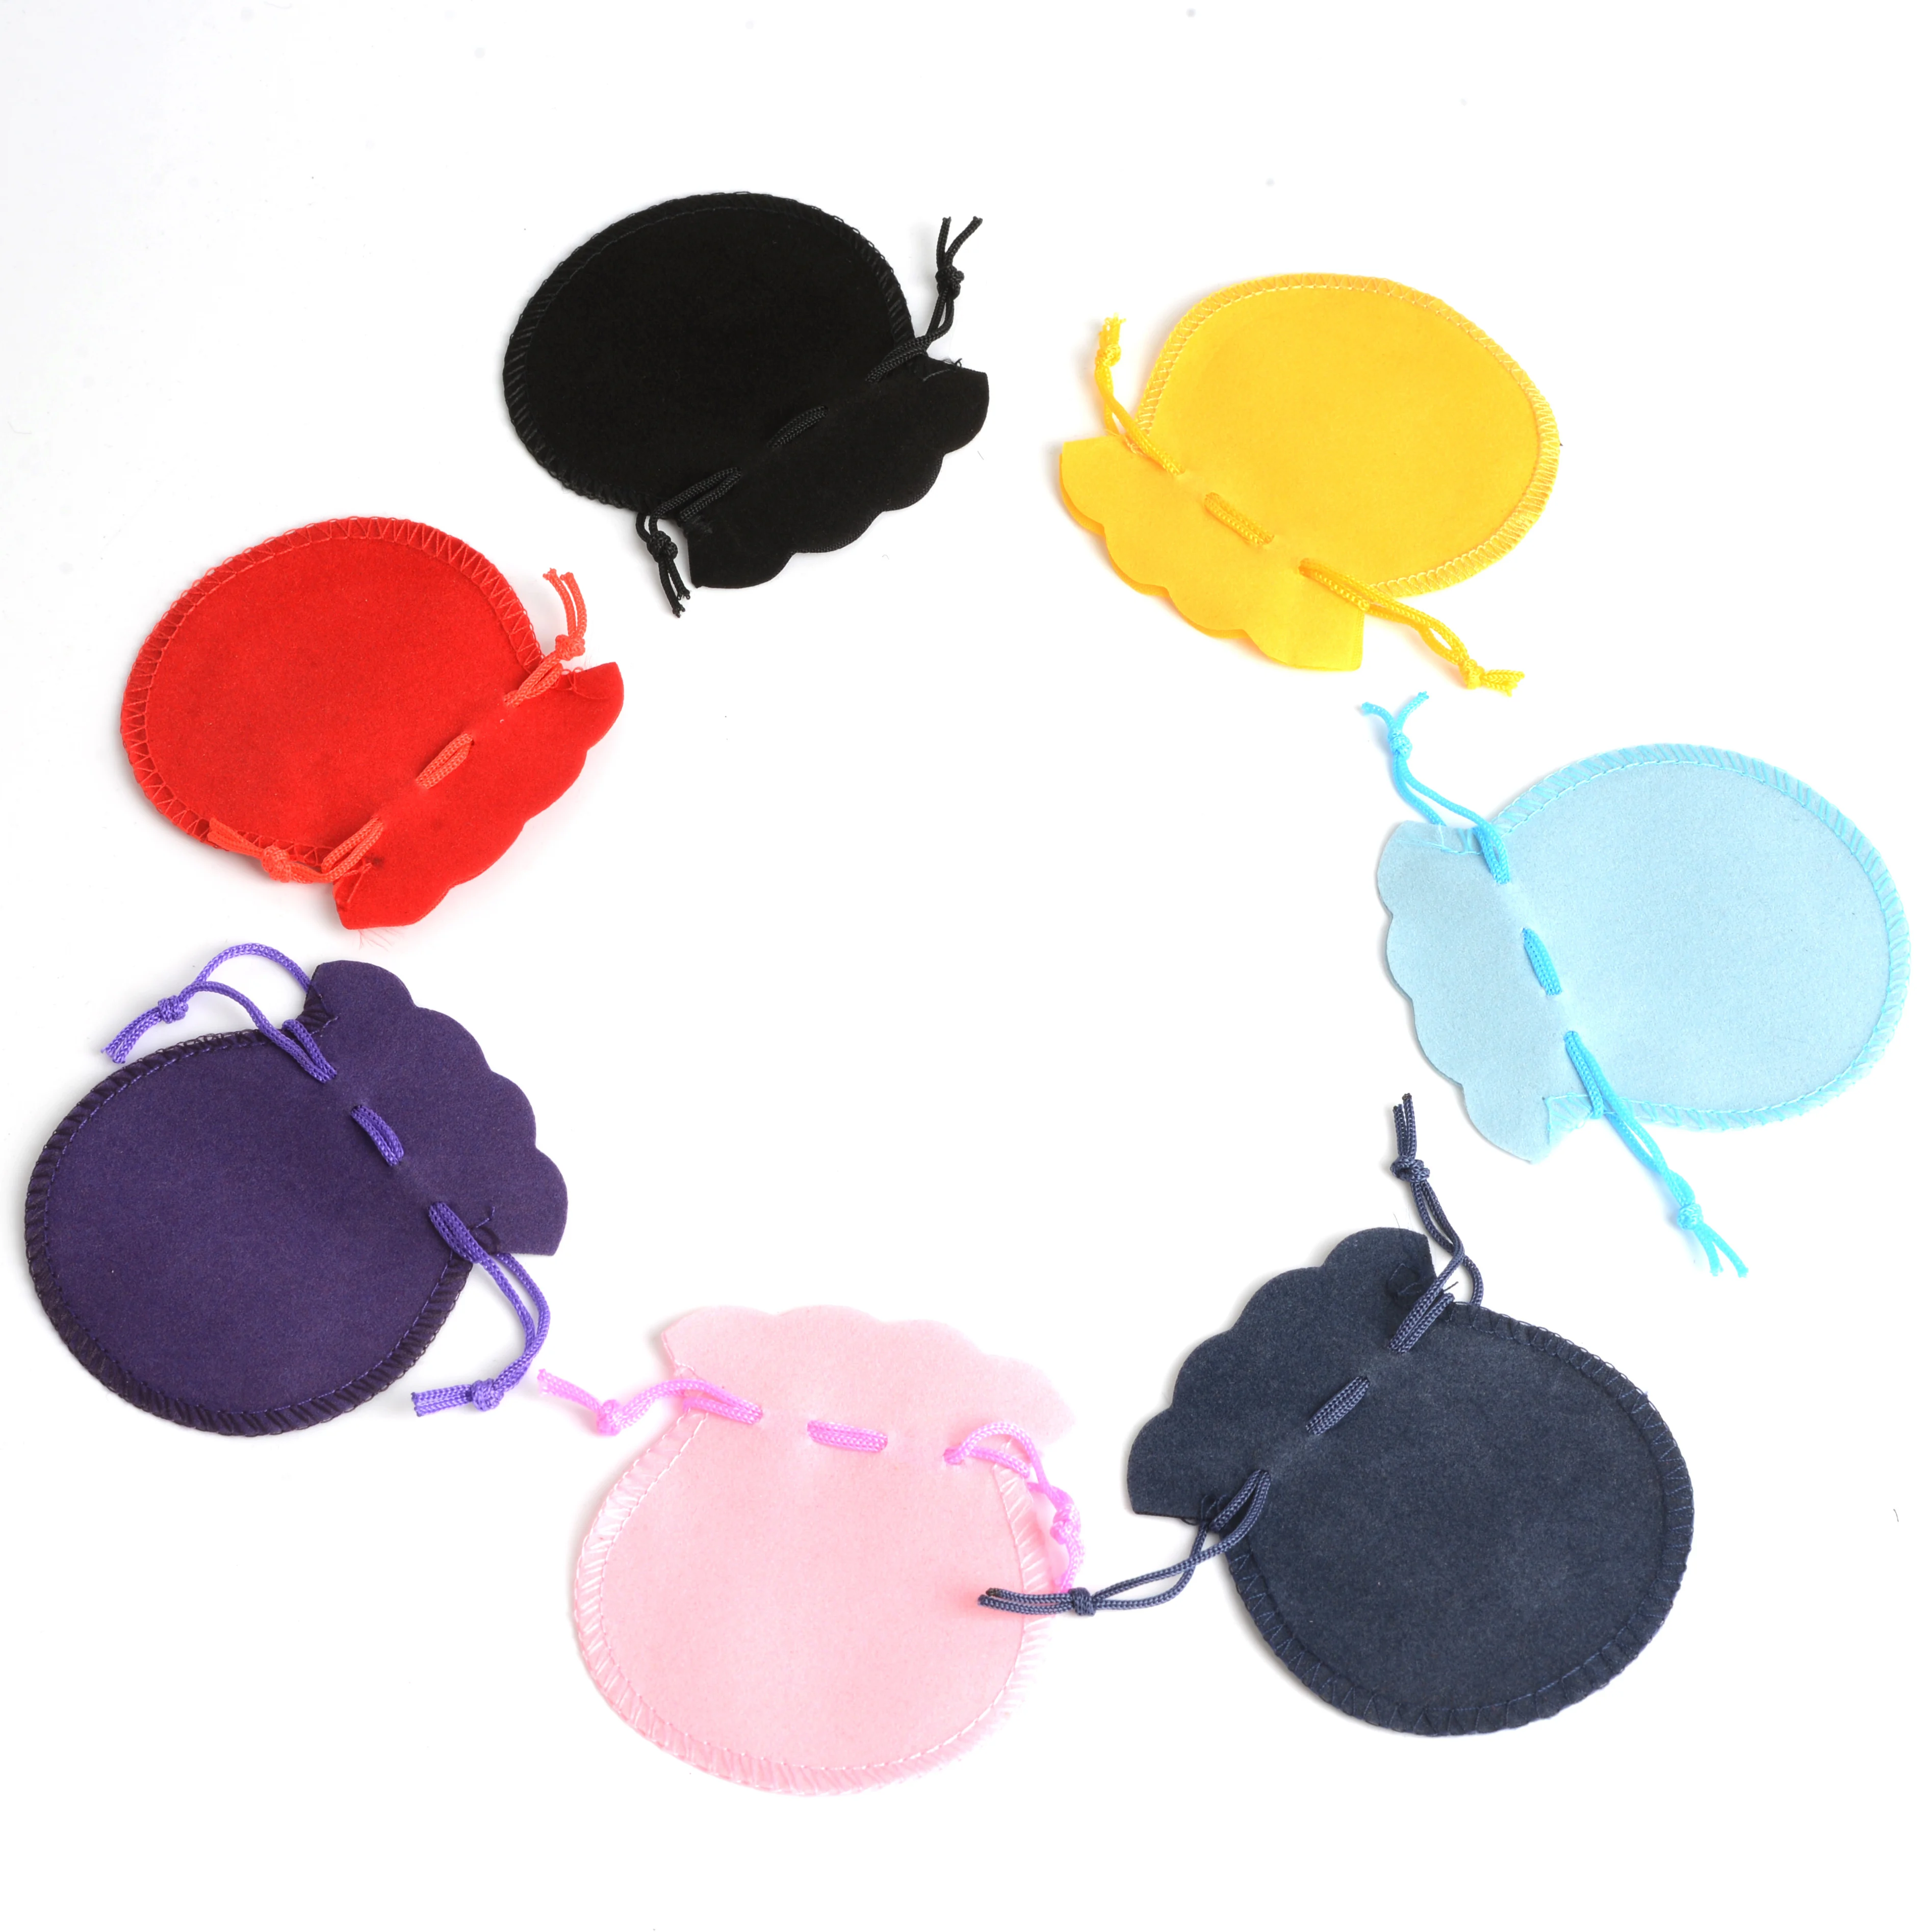 10pcs/lot 7x8cm 9x12cm Velvet Bag Drawstring Pouch Calabash Jewelry Ring Packing Bags Wedding Christmas Candy Gift Favor Bag